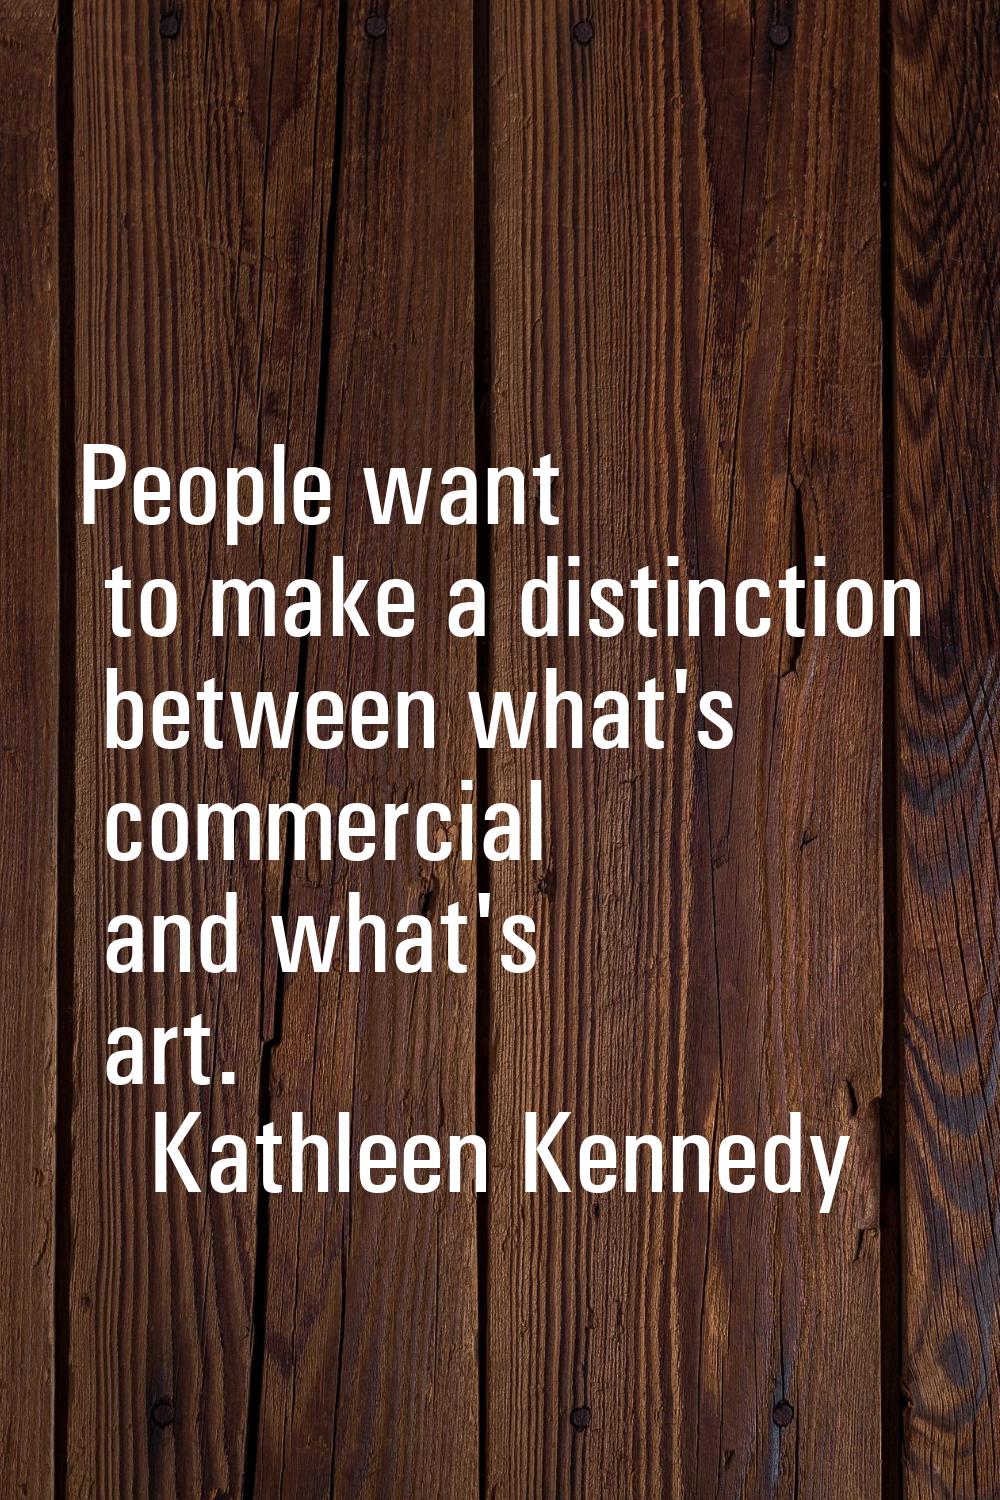 People want to make a distinction between what's commercial and what's art.